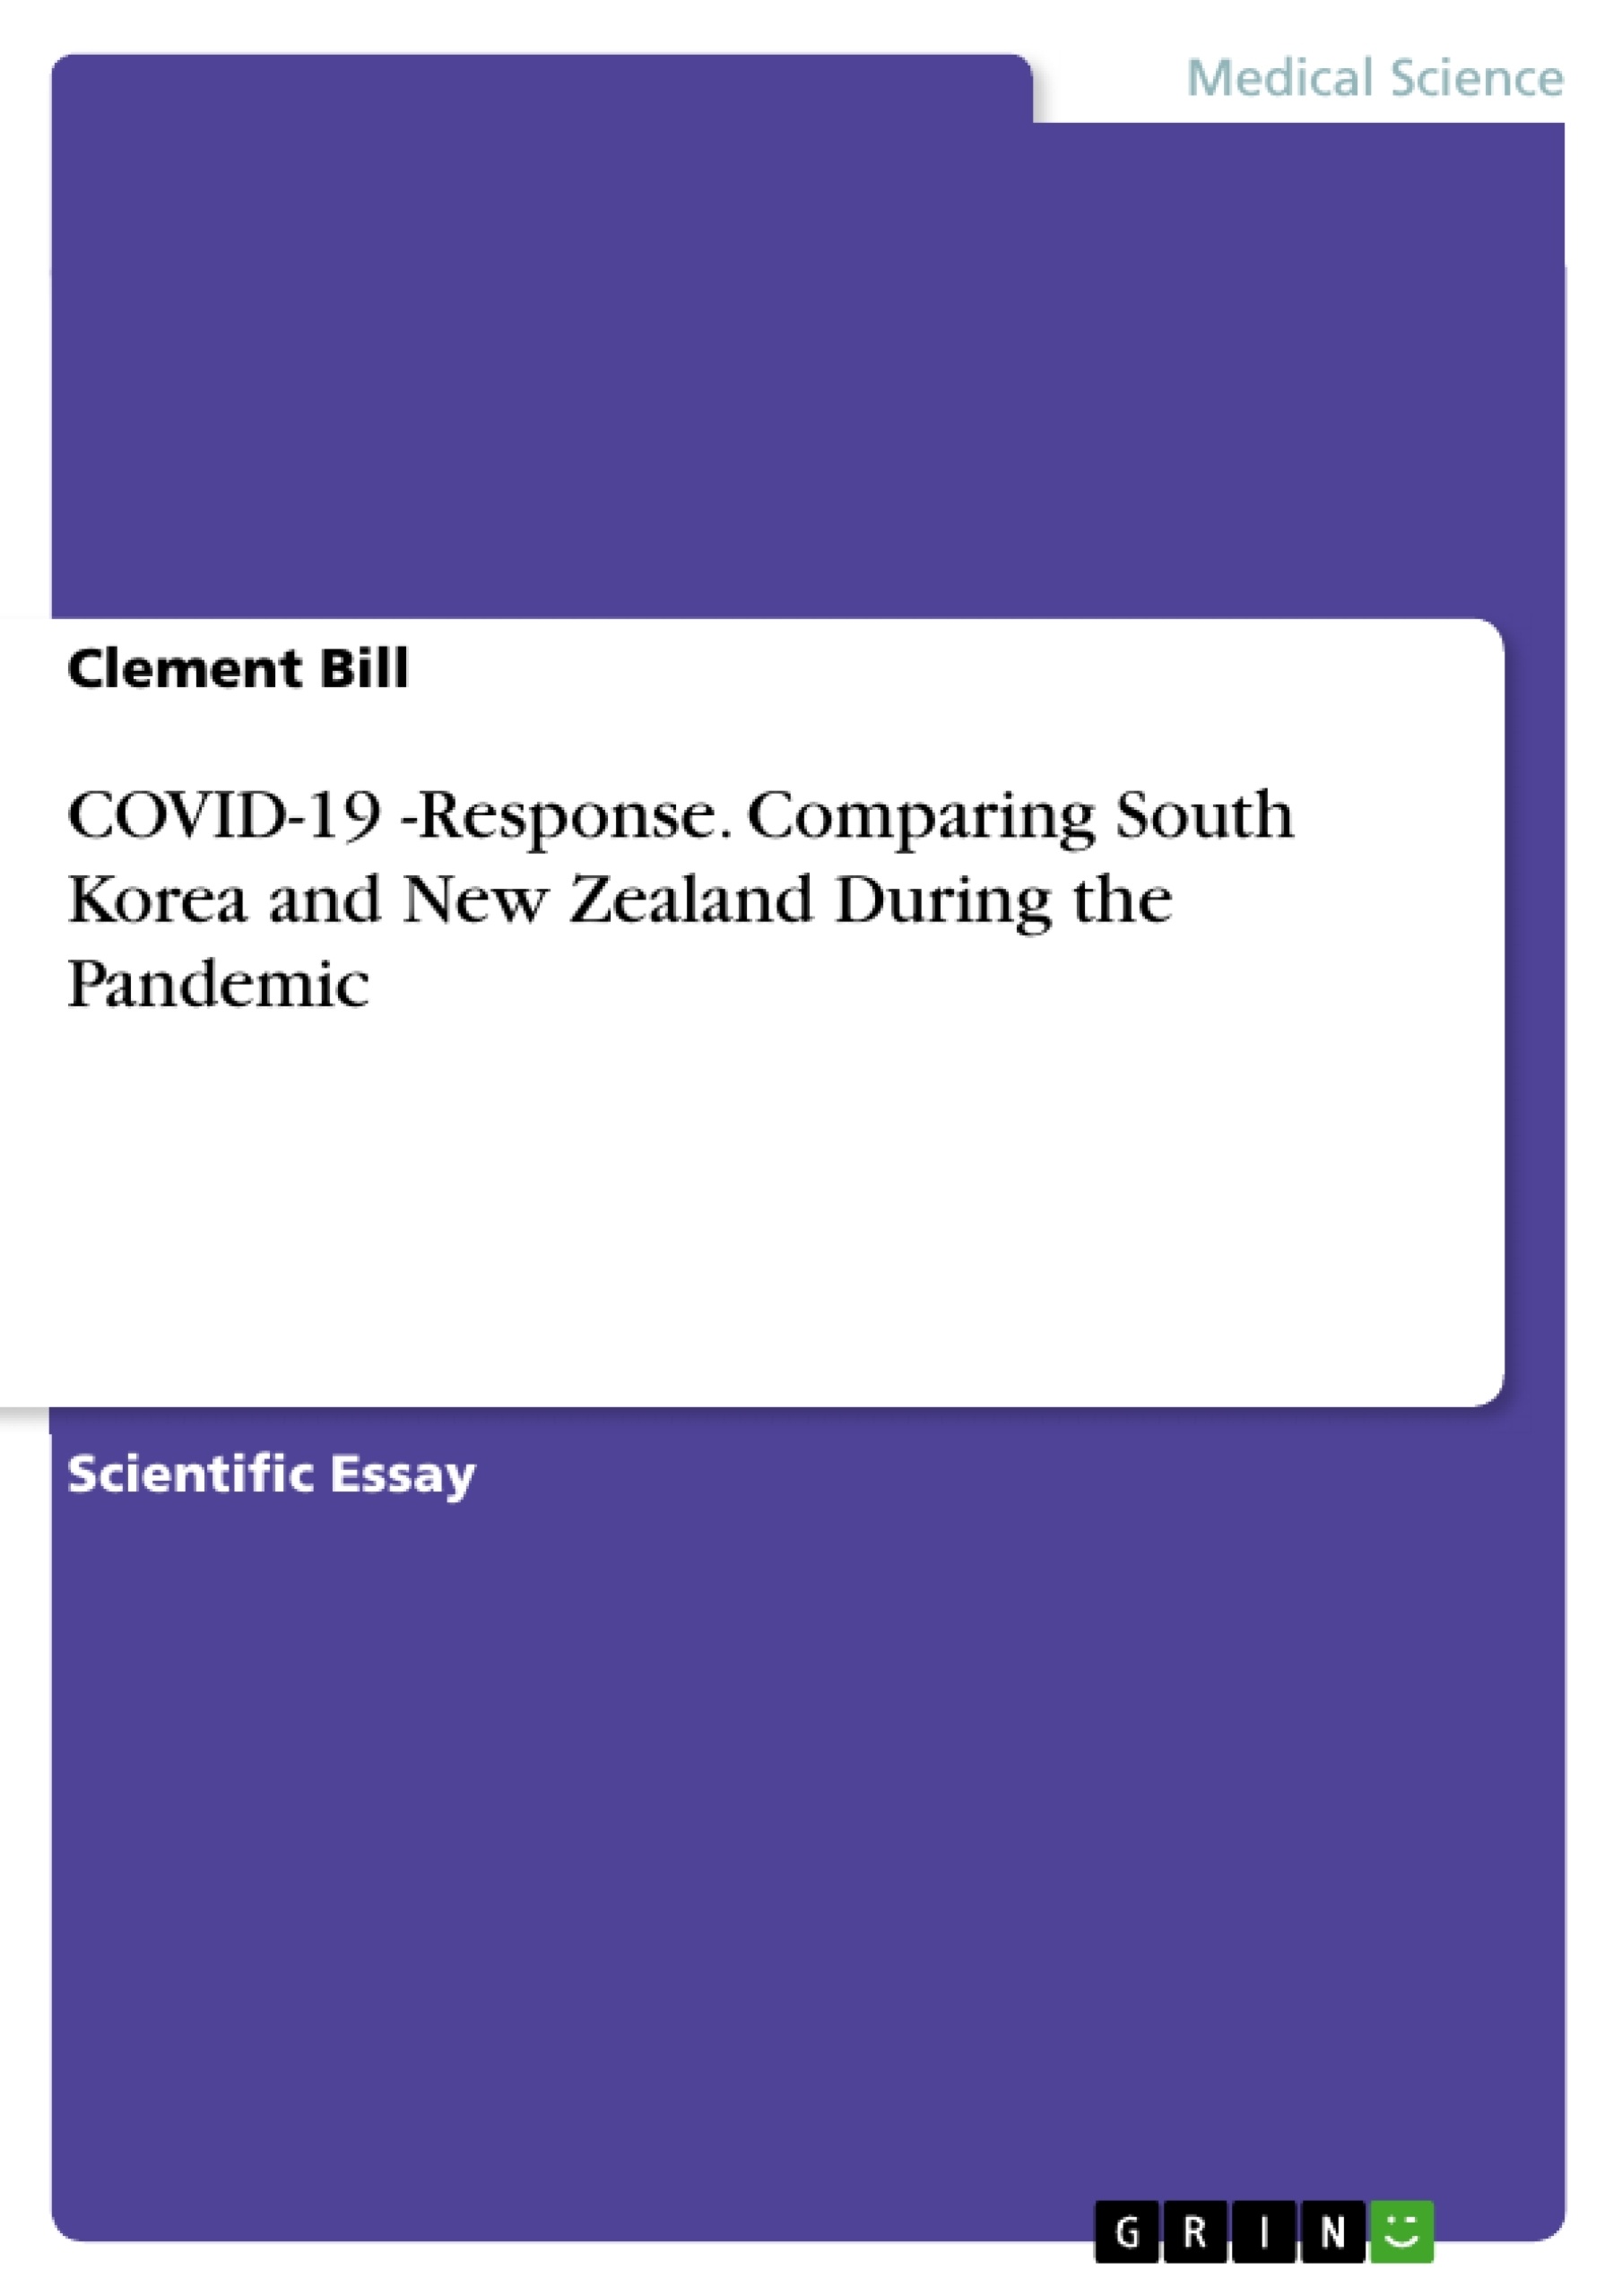 Title: COVID-19 -Response. Comparing South Korea and New Zealand During the Pandemic